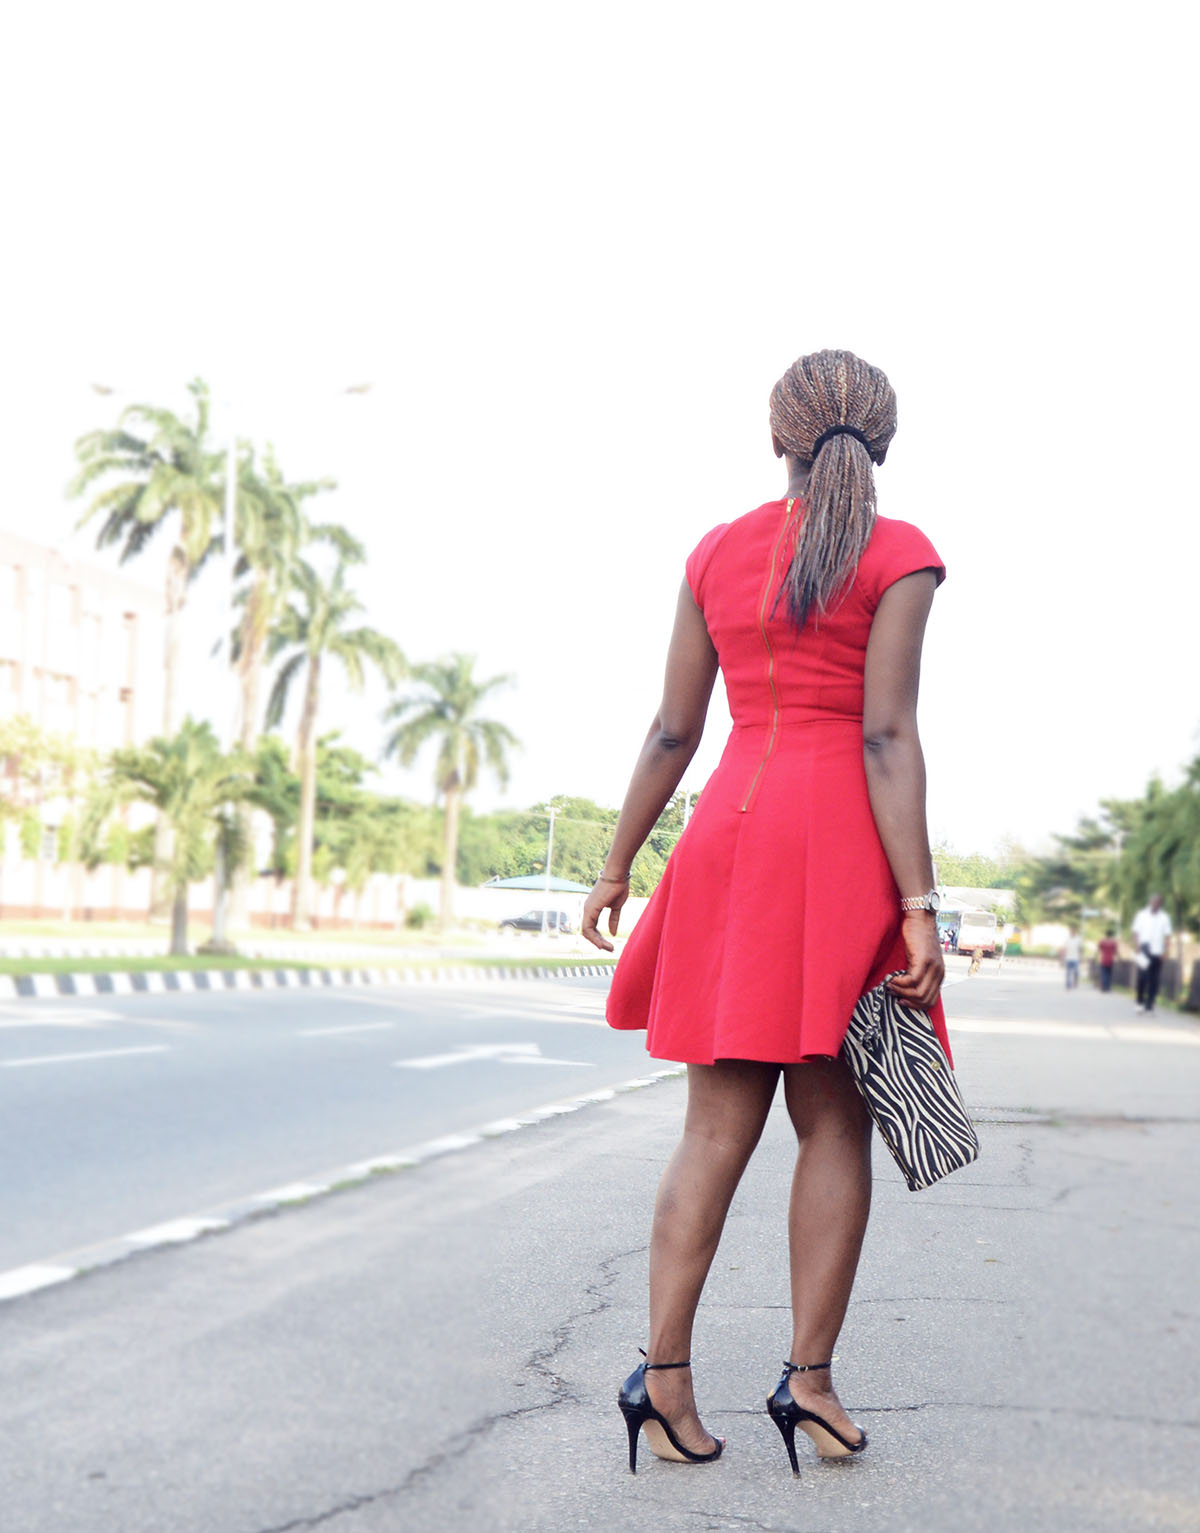 Little Red Dress And Zebra Print outfit style